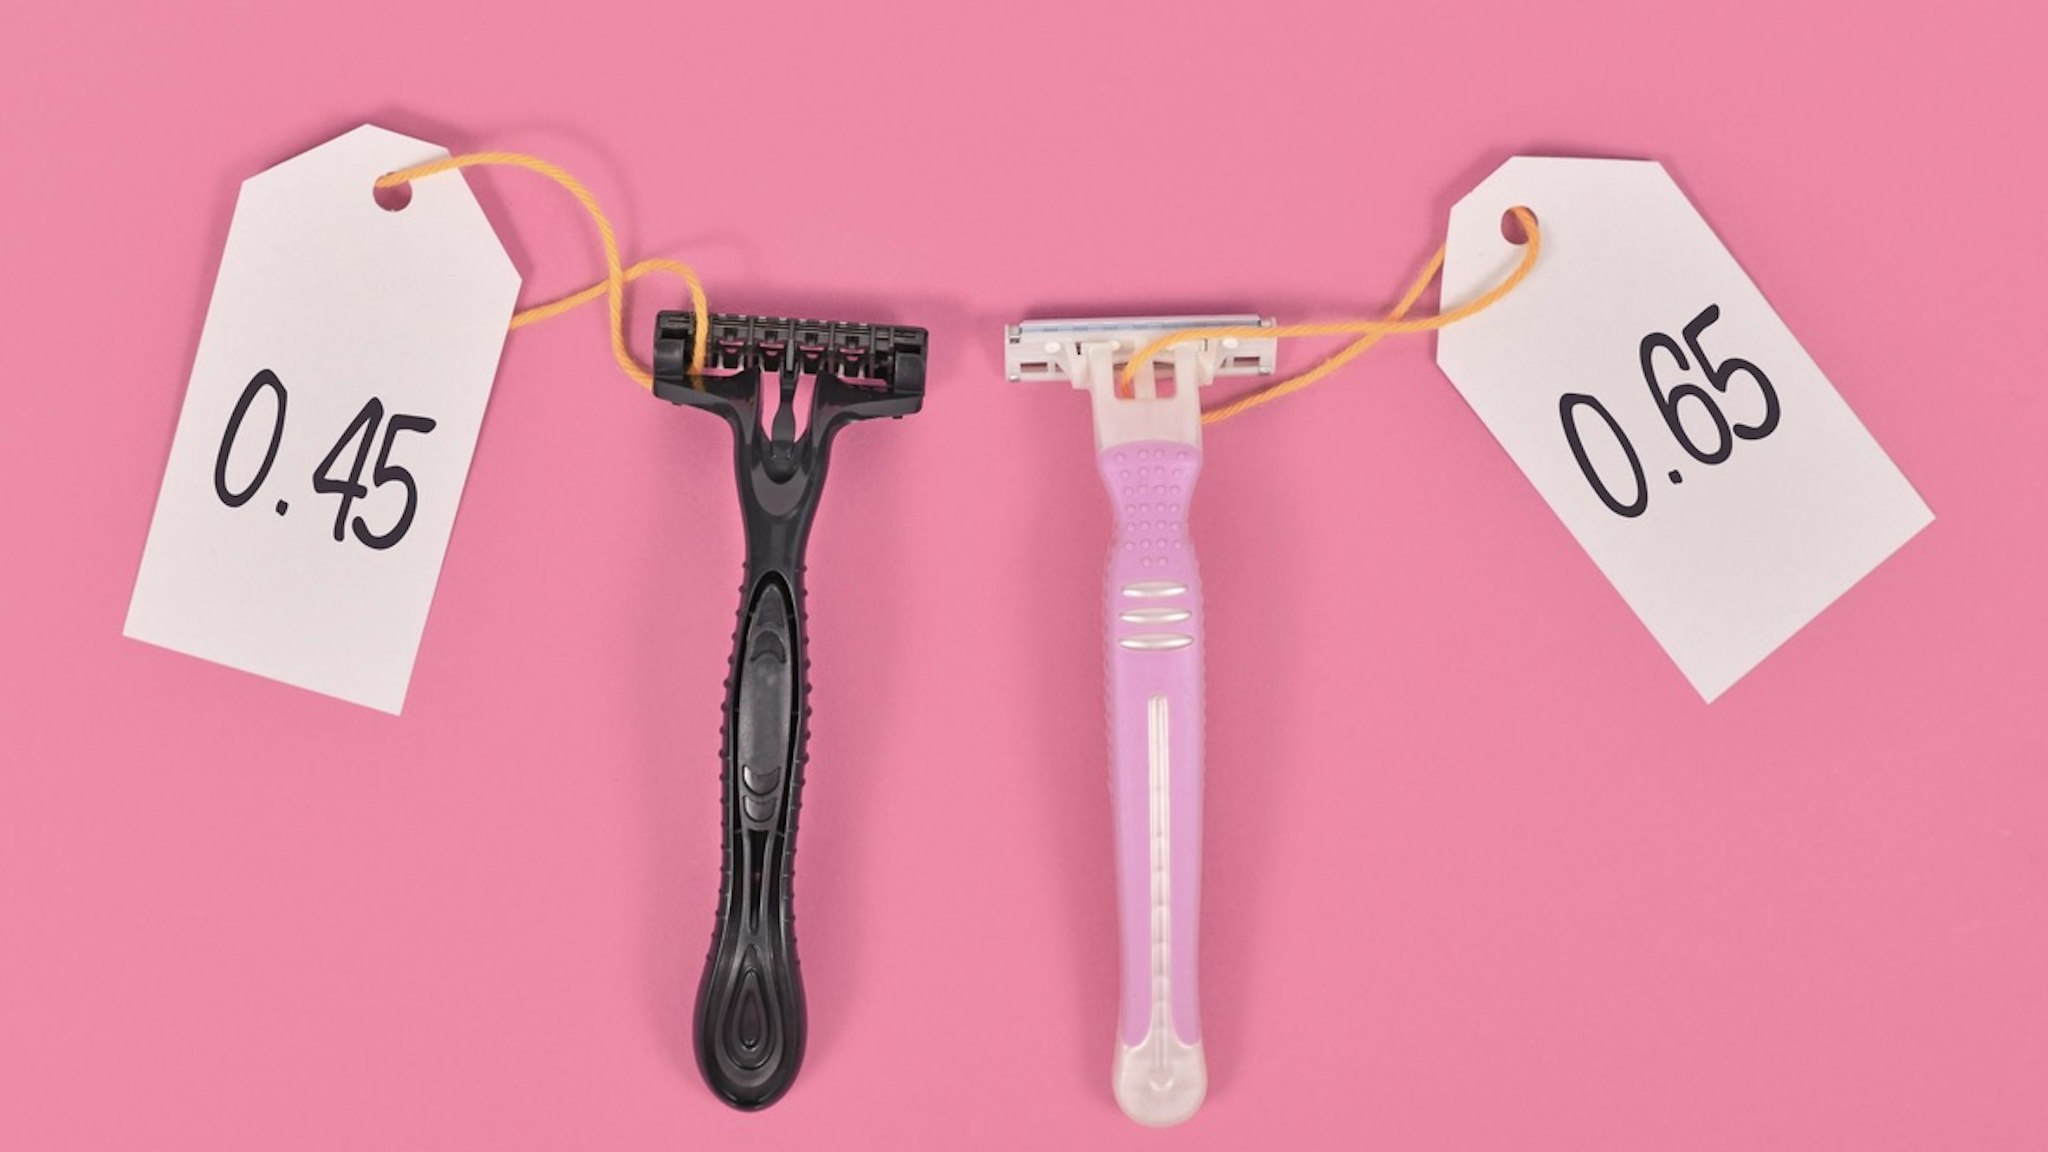 Pink Tax concept - stock photo Concept for pink tax showing pink and black razor aimed at specific genders with different price tags Firn via Getty Images